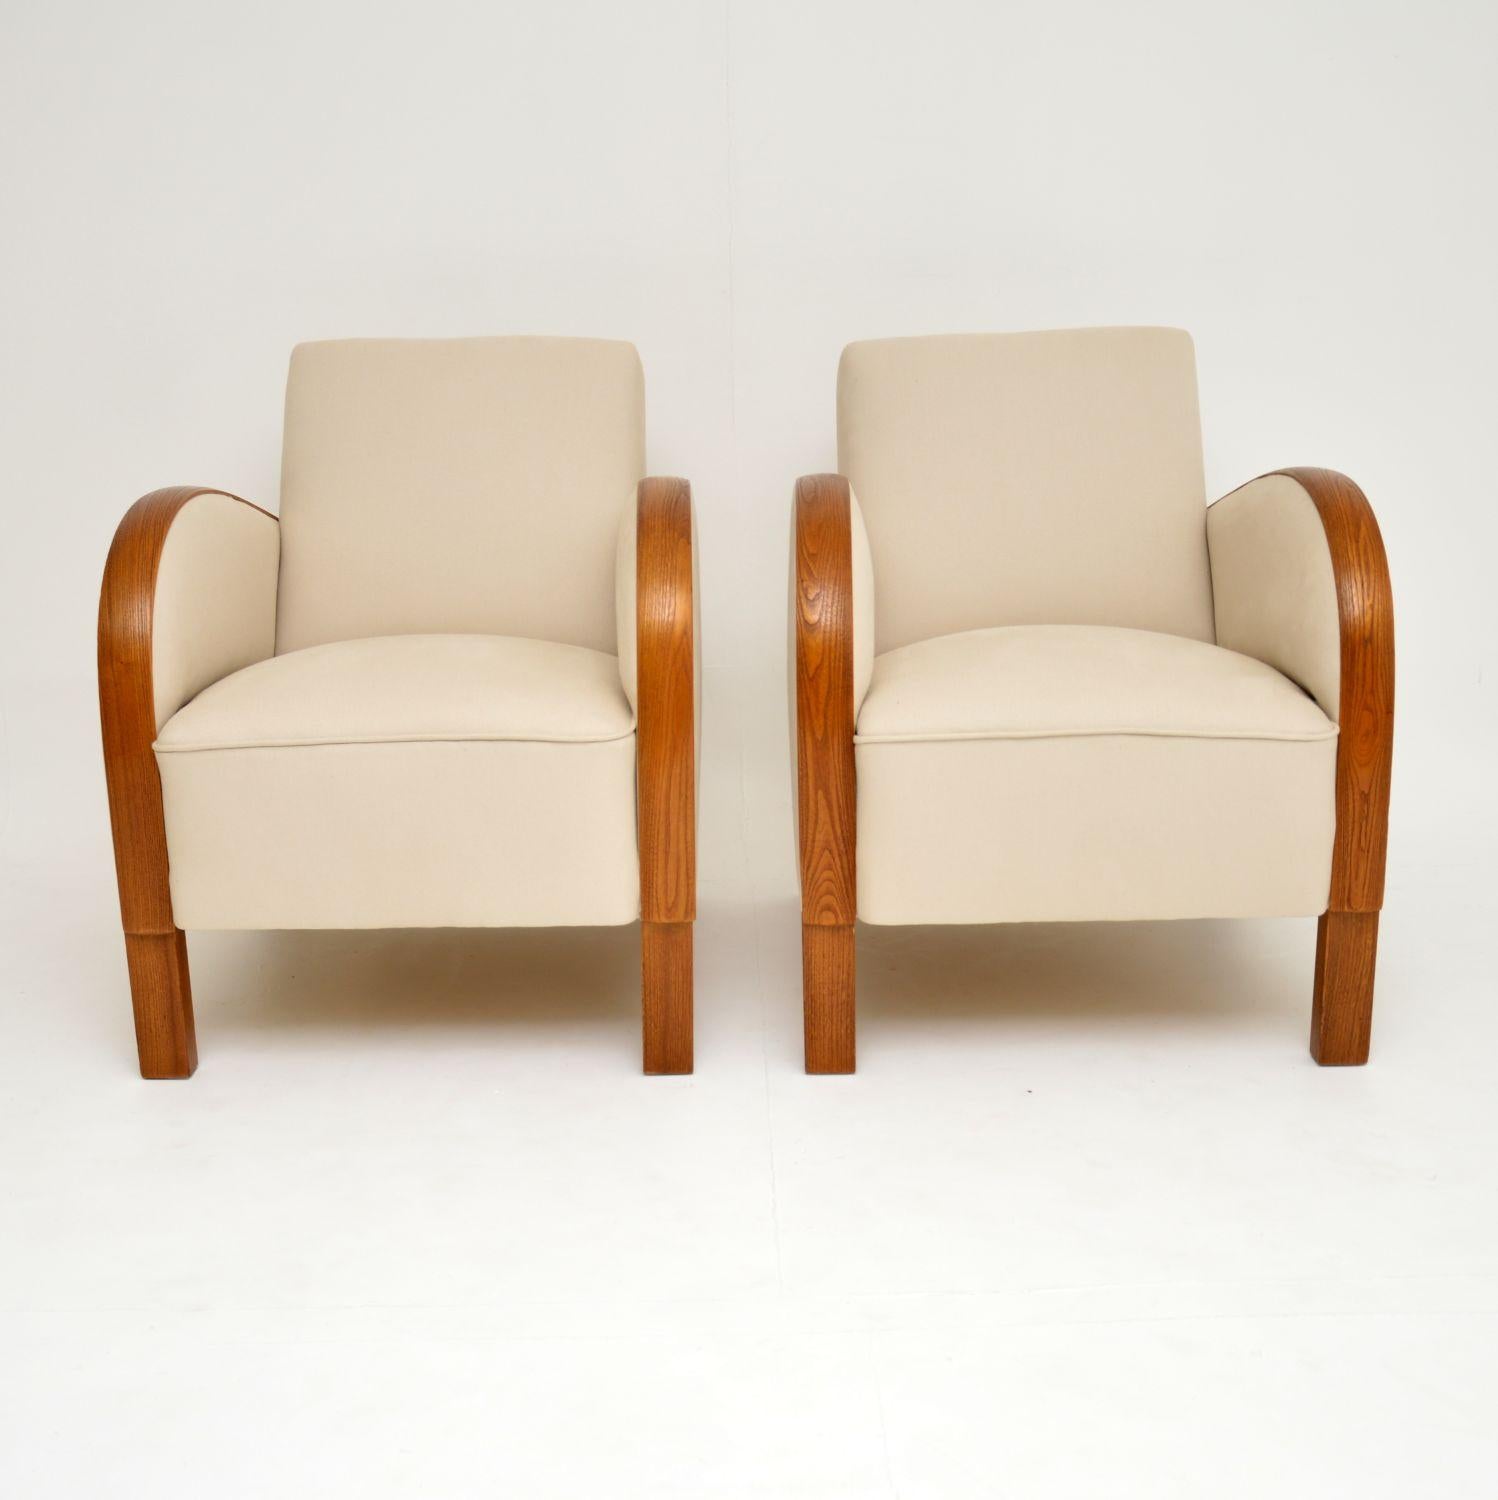 This pair of original Swedish Art Deco armchairs are very stylish and comfortable too.

They date from circa 1930s and have just come over from Sweden, been re-polished and re-upholstered in a natural cotton cream fabric. They have been